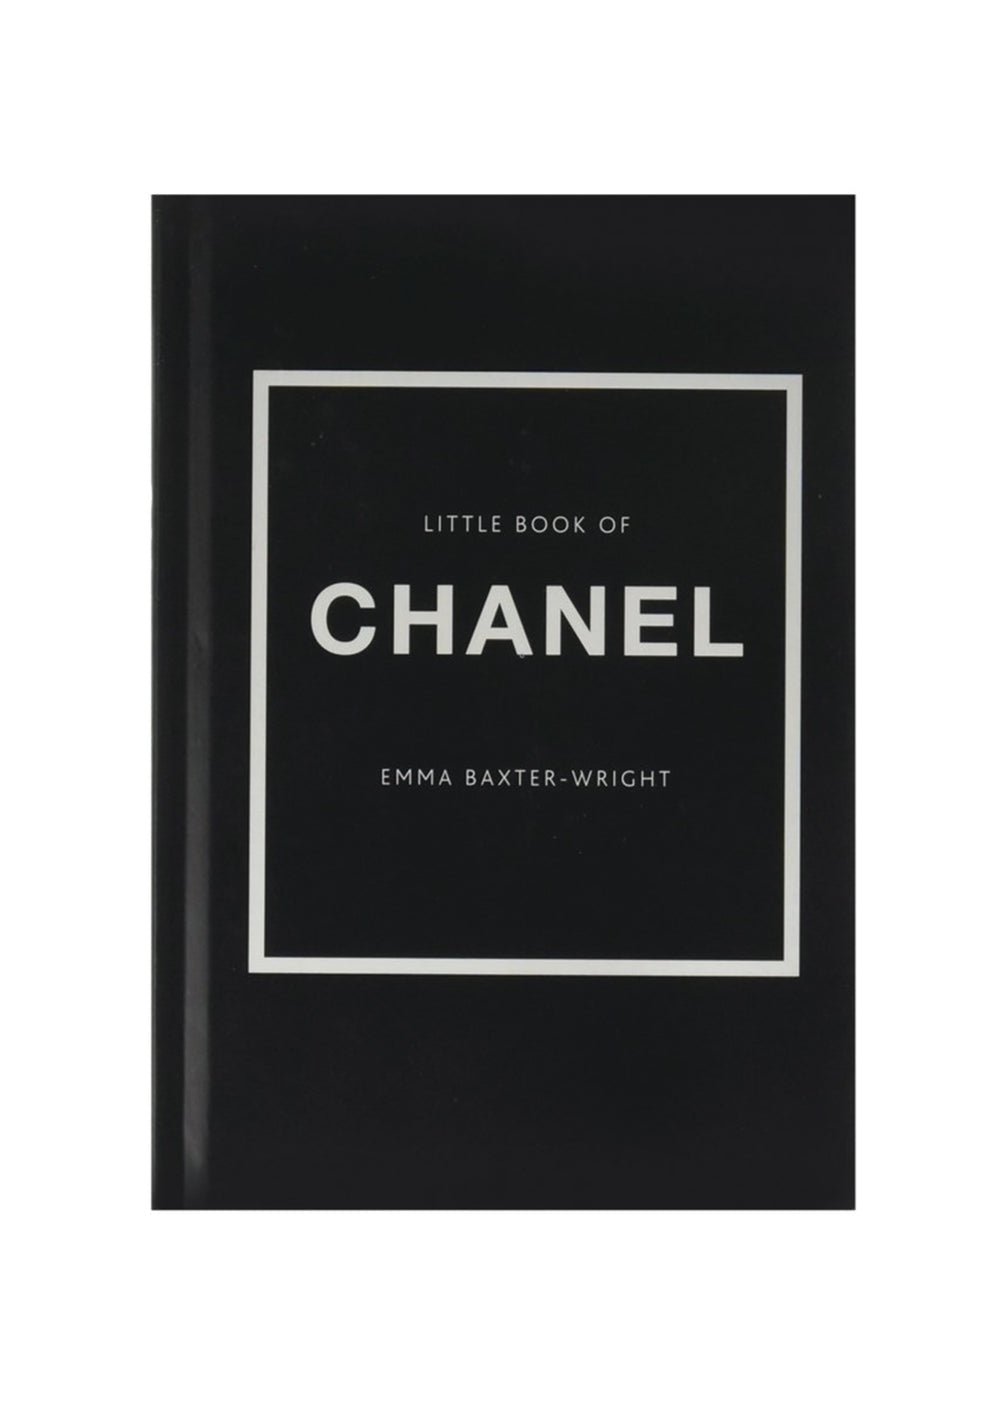 Little Book of Chanel - Chillis & More NZ